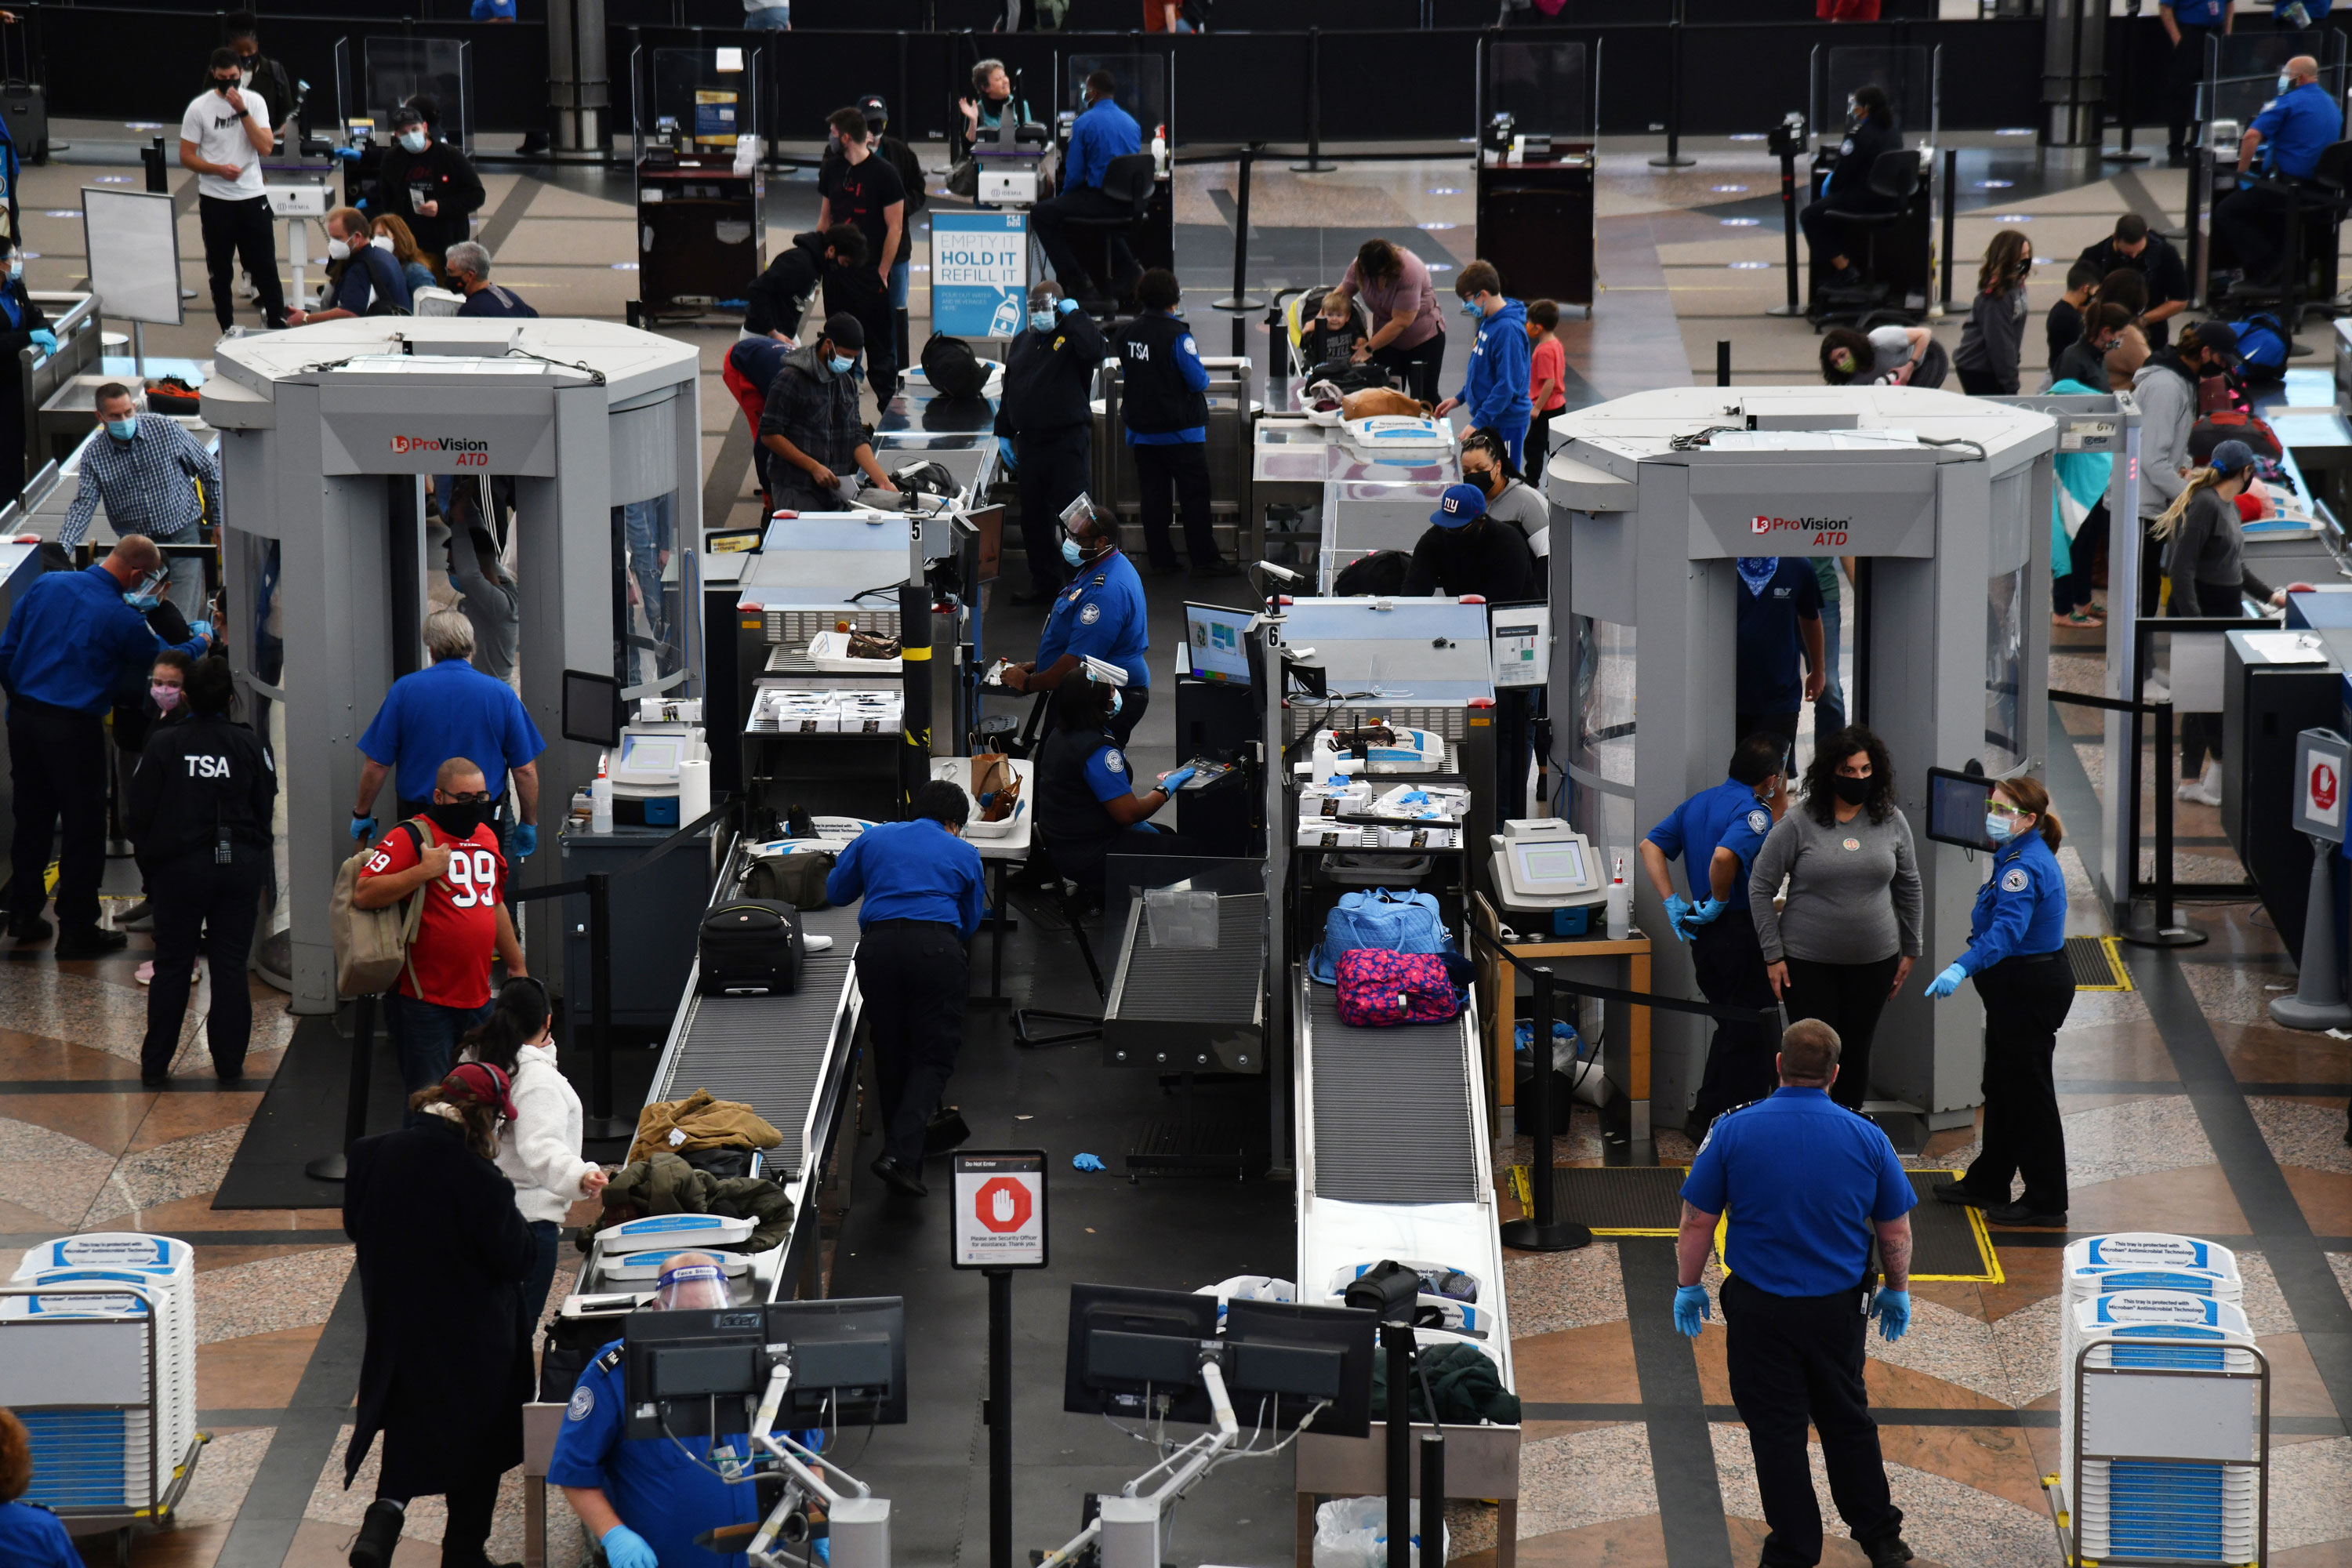 Transportation Security Administration workers check travelers' luggage at Denver International Airport in Colorado on November 20, 2020.